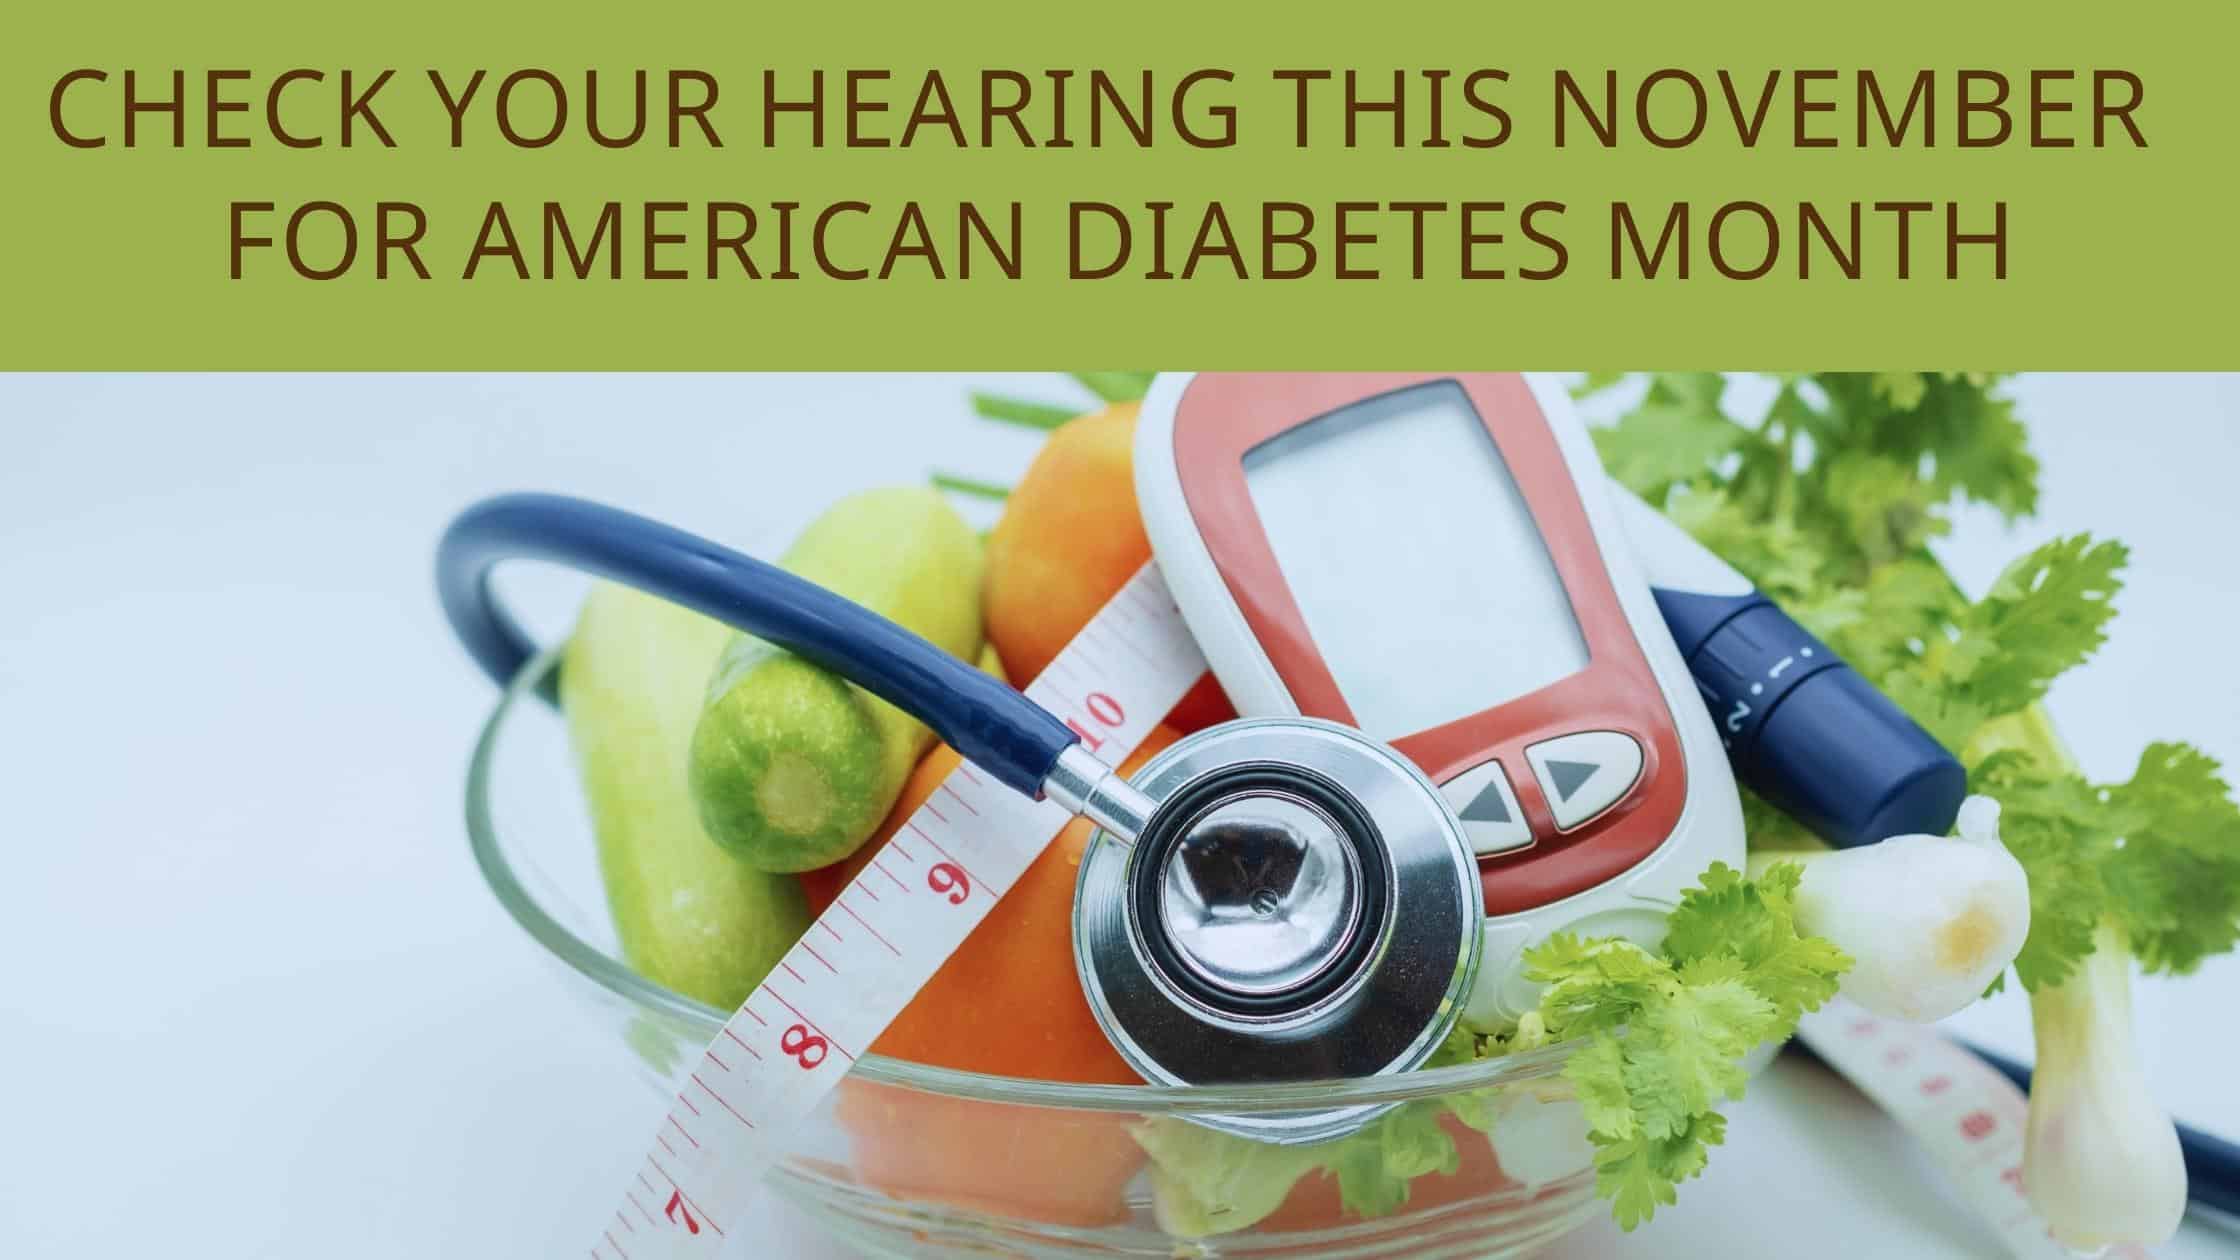 Featured image for “Check Your Hearing This November for American Diabetes Month”